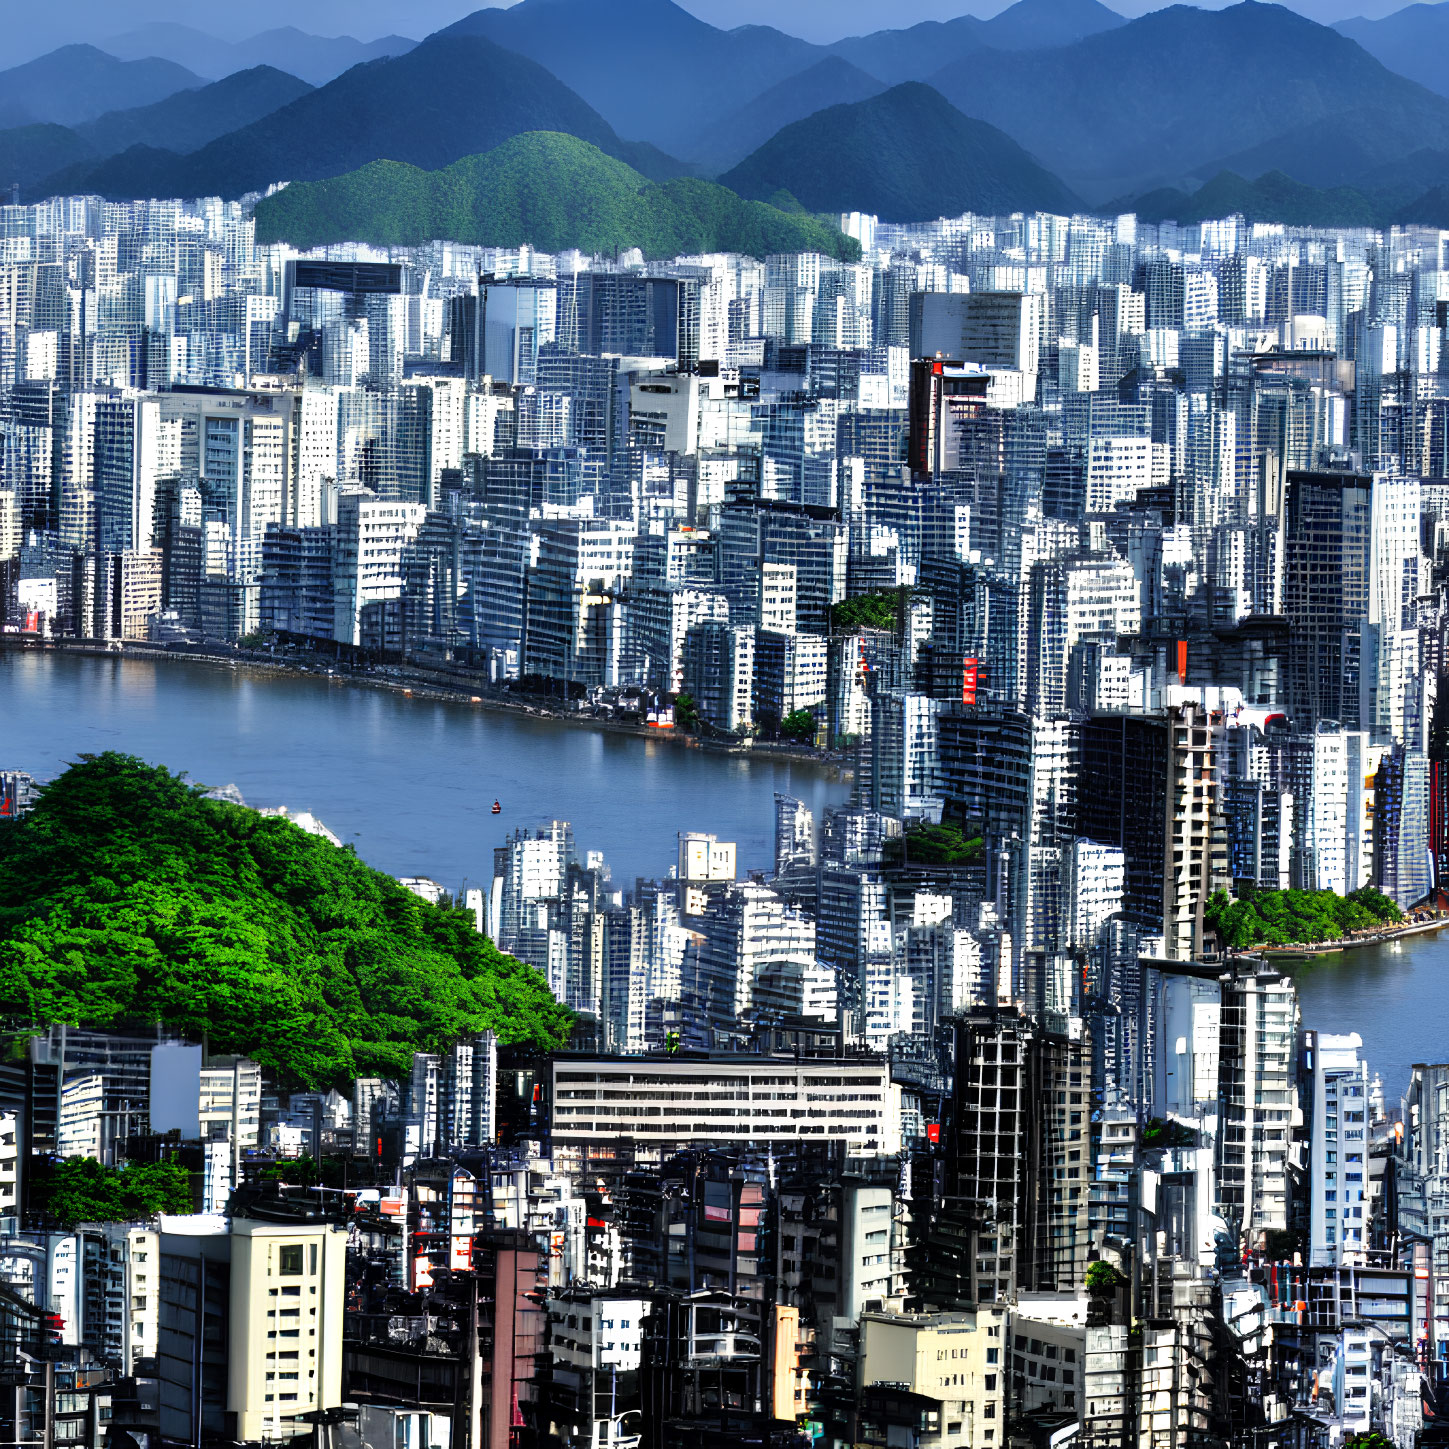 Urban skyline with high-rise buildings by river and mountains.